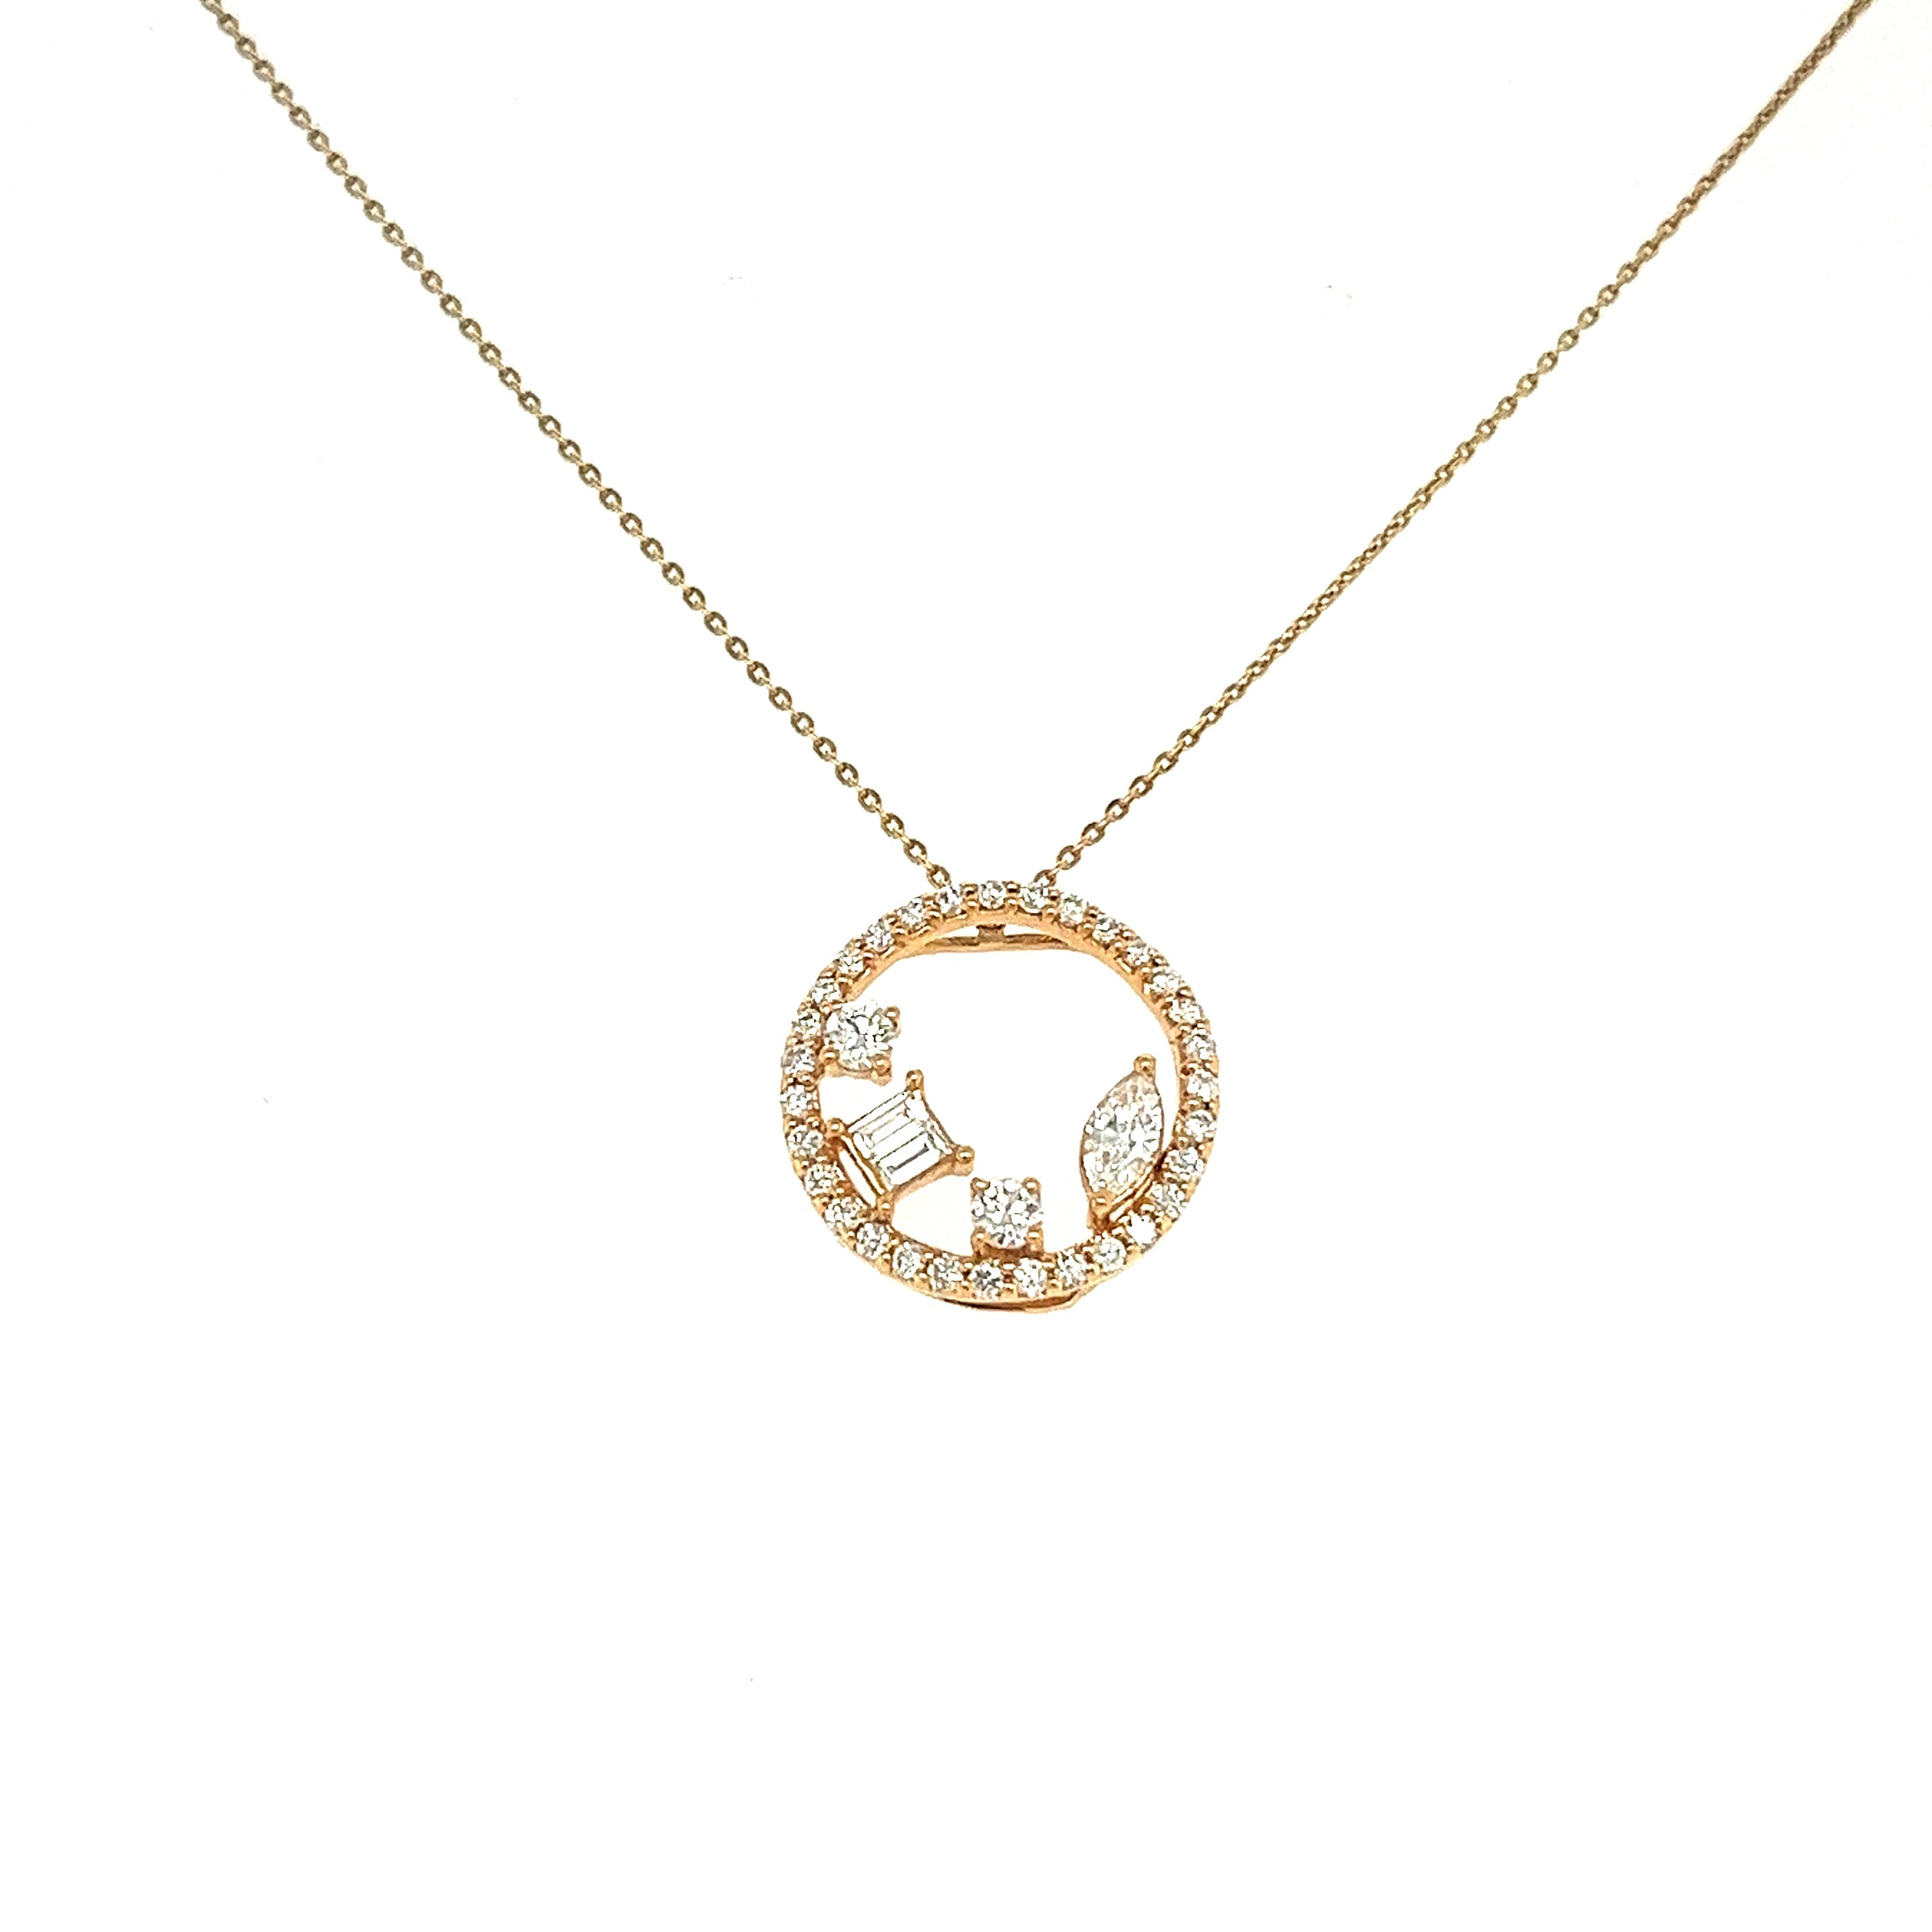 Circular Shaped Diamond Necklace in 18K Rose Gold - P84A